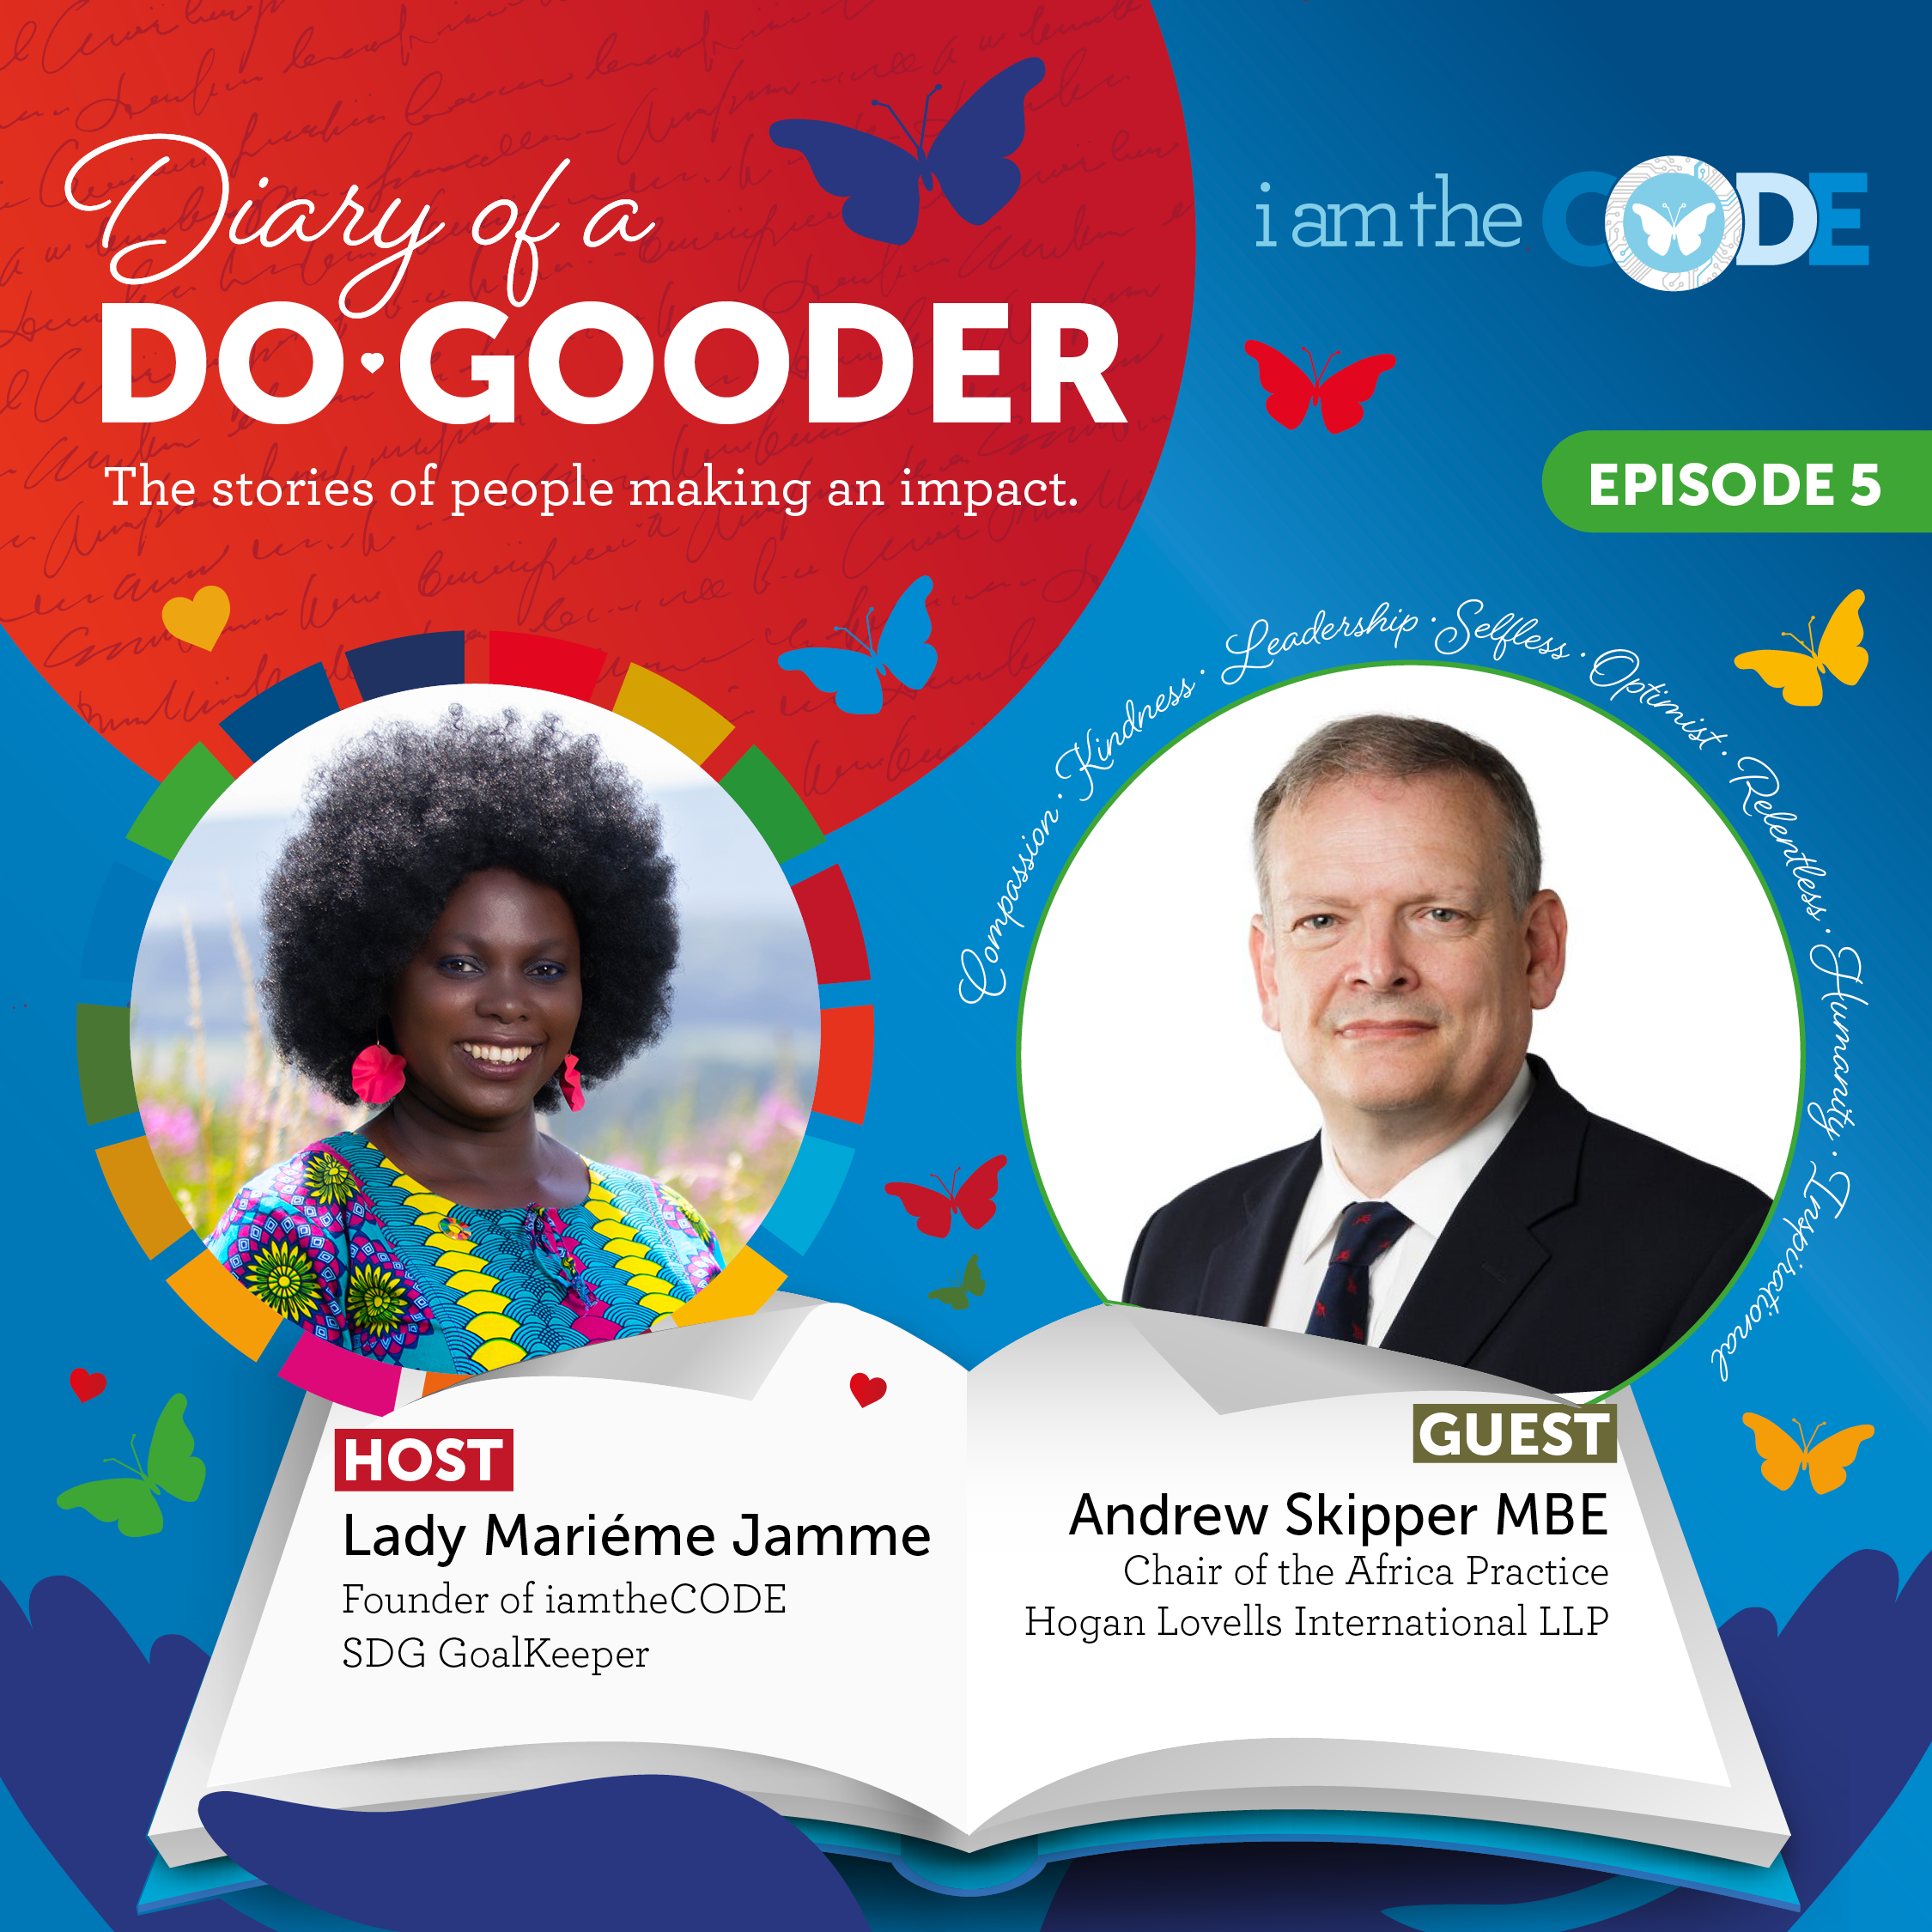 S7E5 Diary Of A Do-Gooder – ‘Doing Good’ as a Lawyer with Andrew Skipper